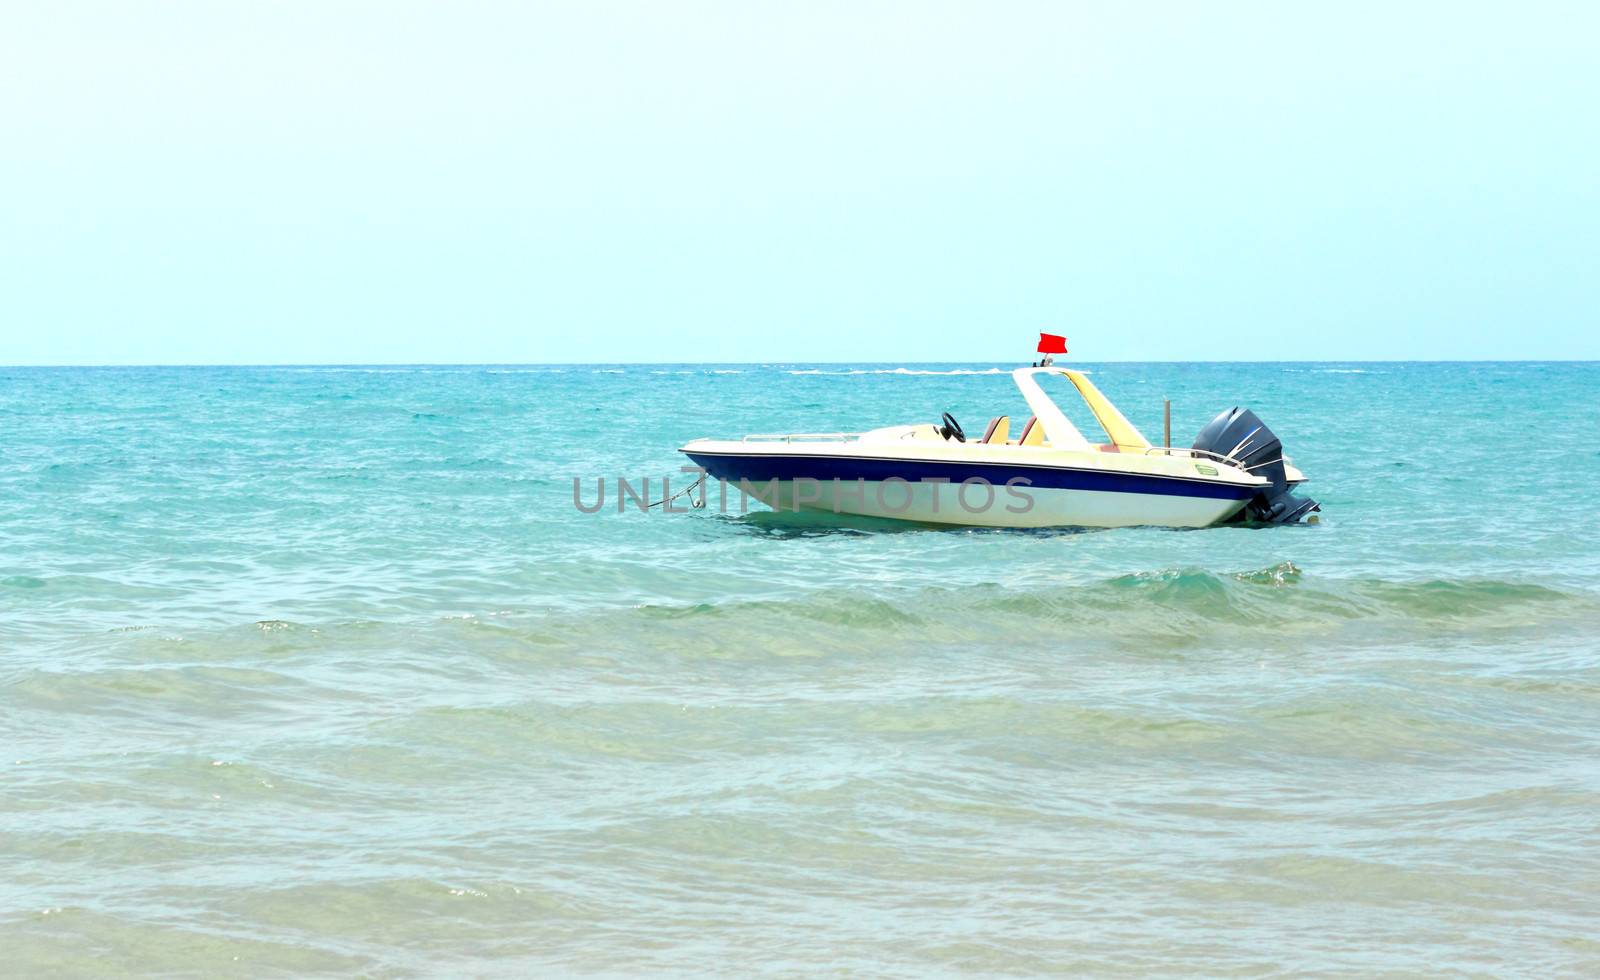 The small boat for sea trips in the coastal waters near the beach at the resort.